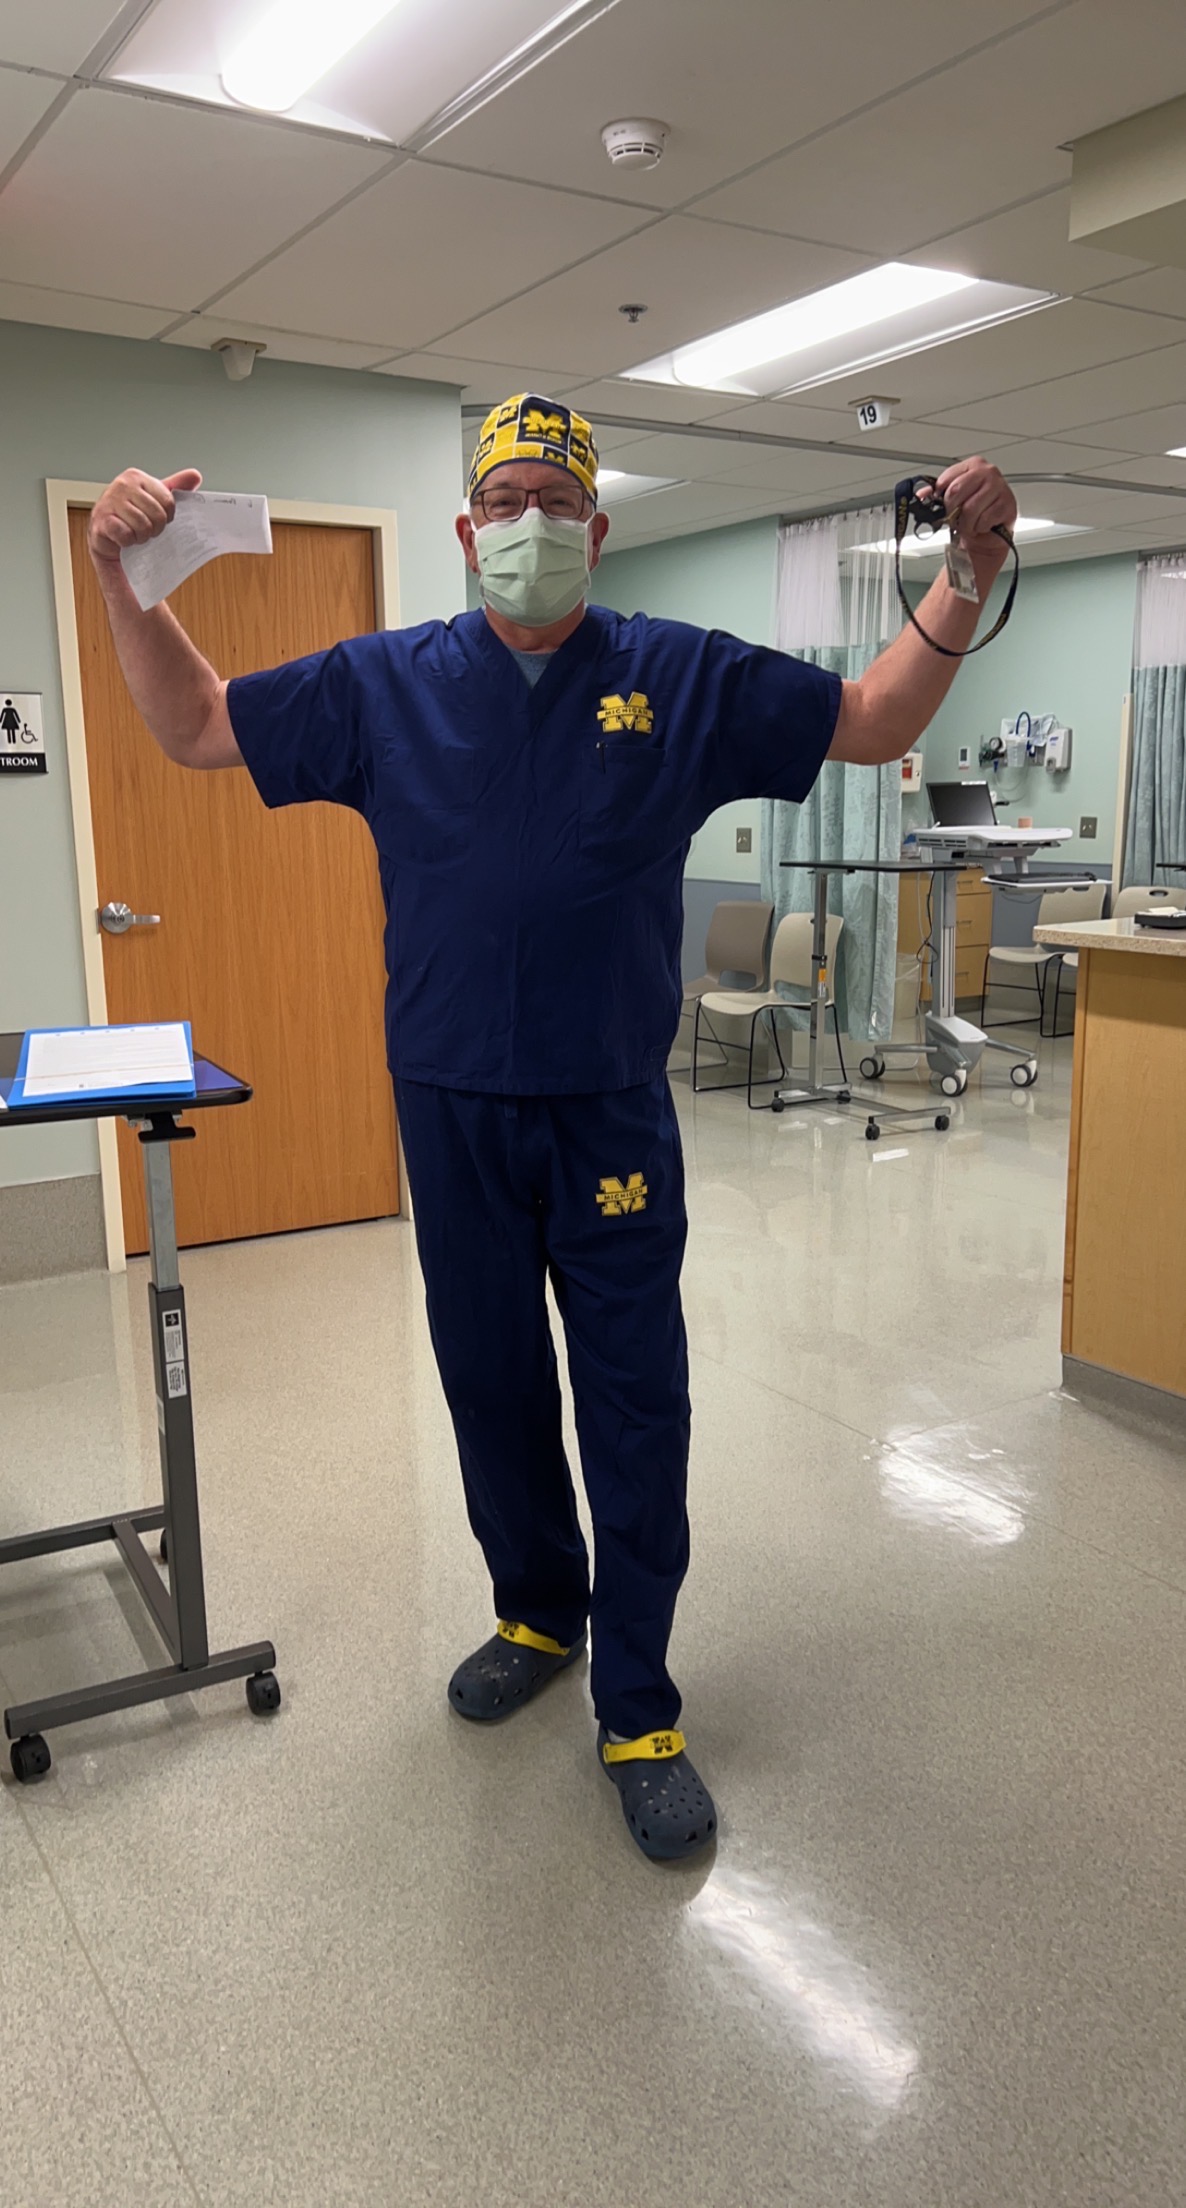 A “Michigan Man” celebrates in the heart of Buckeye country after the 2022 U-M vs. OSU football game. John W. Dietrich, ’78, MD’83, is an orthopedic hand surgeon practicing in Akron, Ohio. In John’s hand is the Michigan lanyard he has worn for the last 20-plus years.